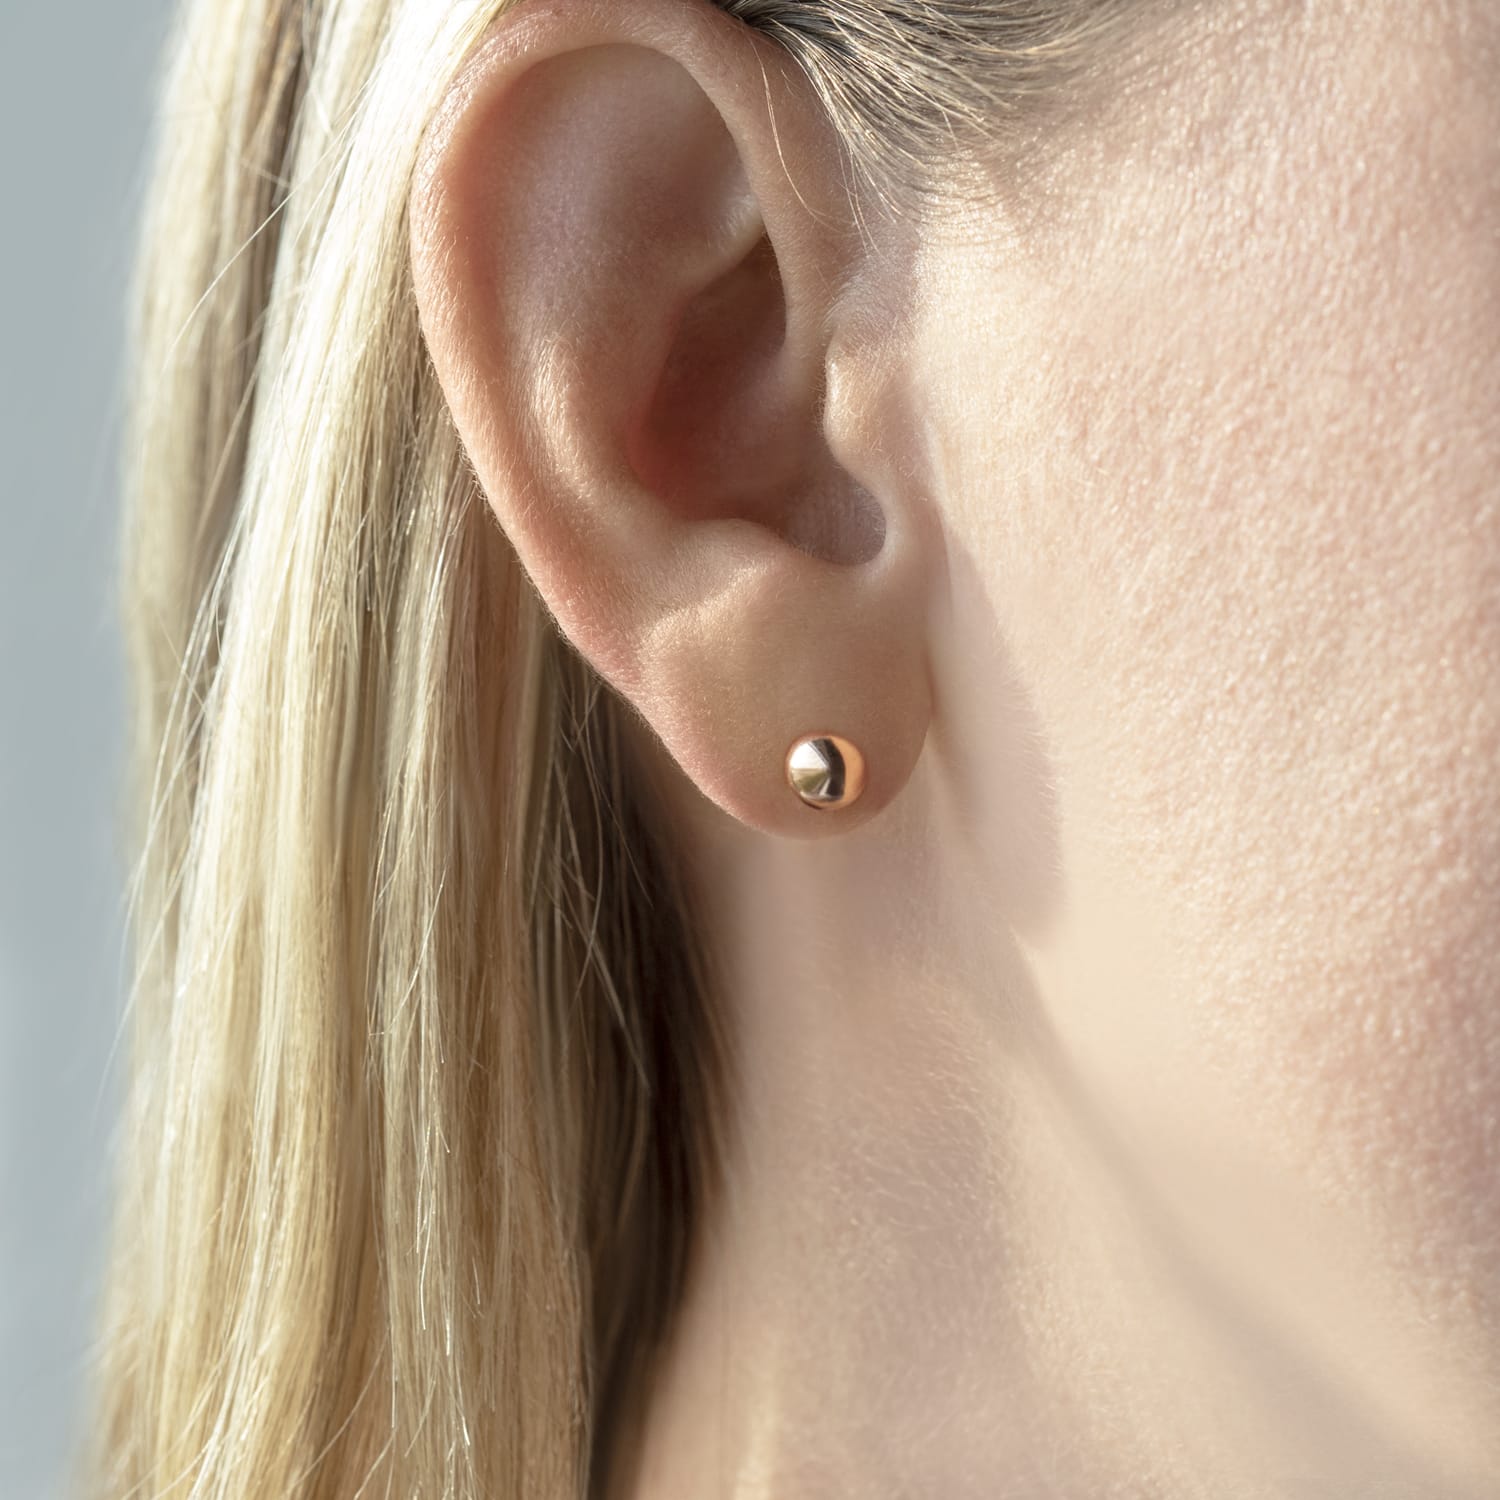 The Best Piercings For Big Ears According To An Expert